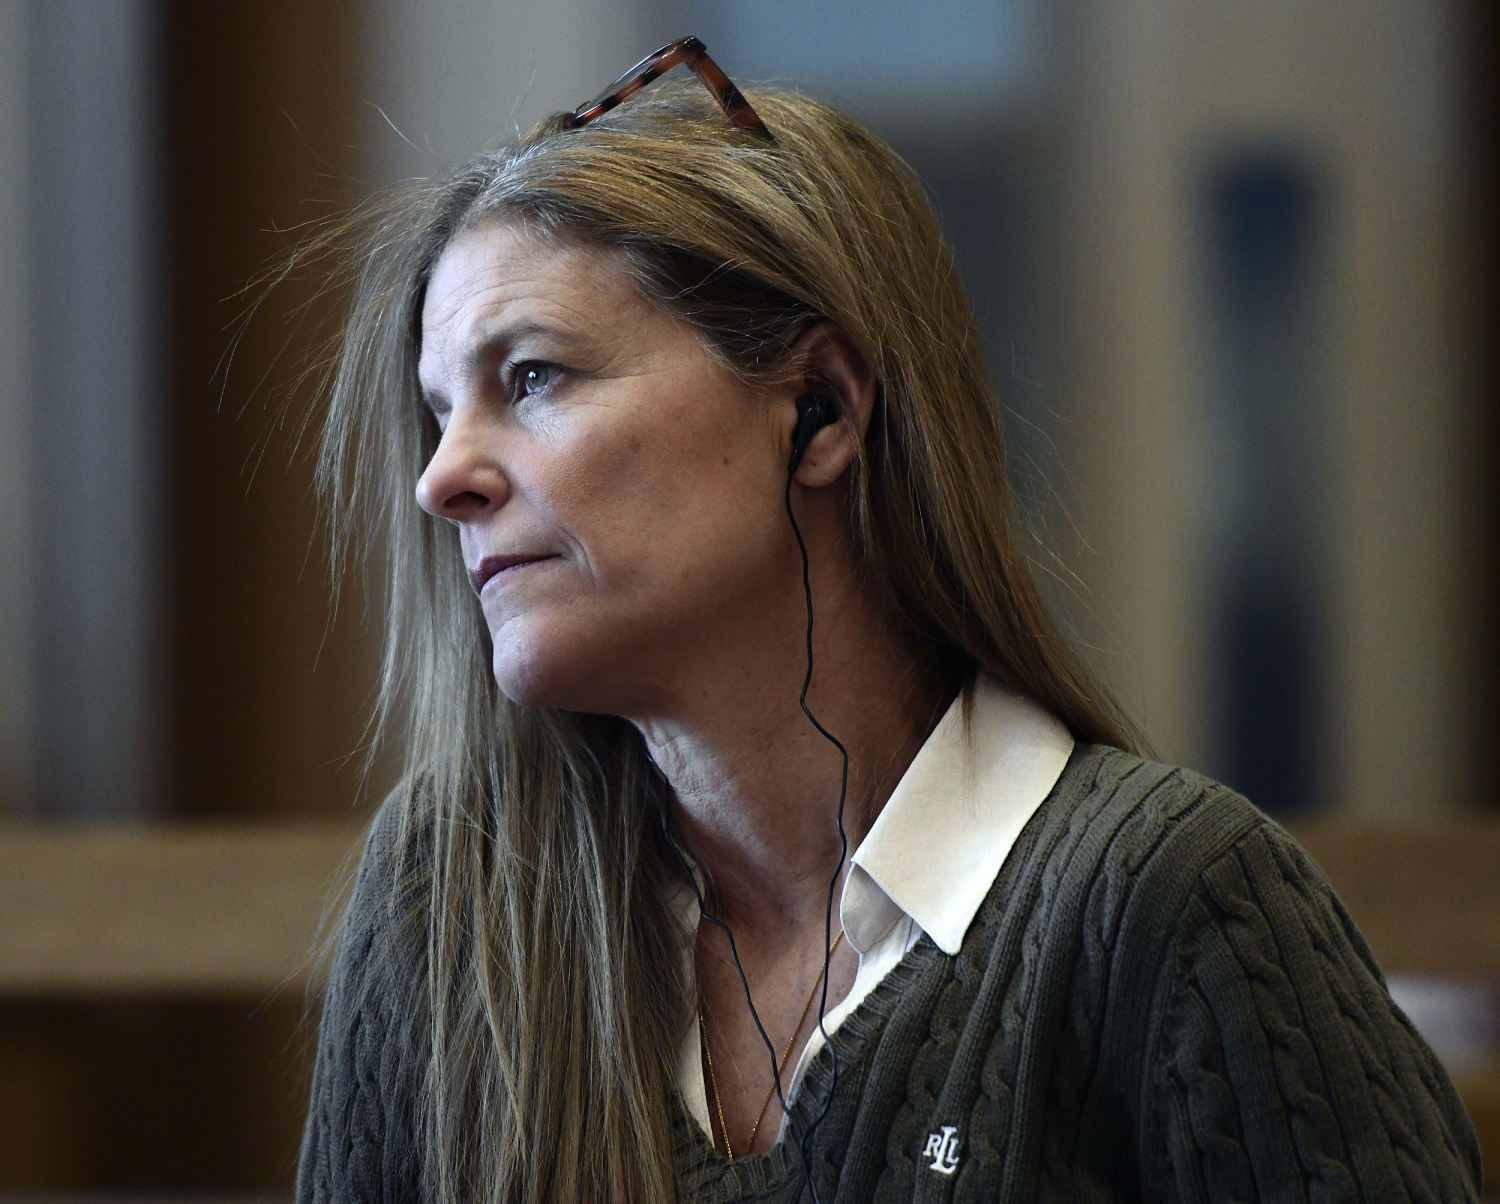 Michelle Troconis found guilty in death of Jennifer Dulos, Connecticut mom who disappeared in 2019